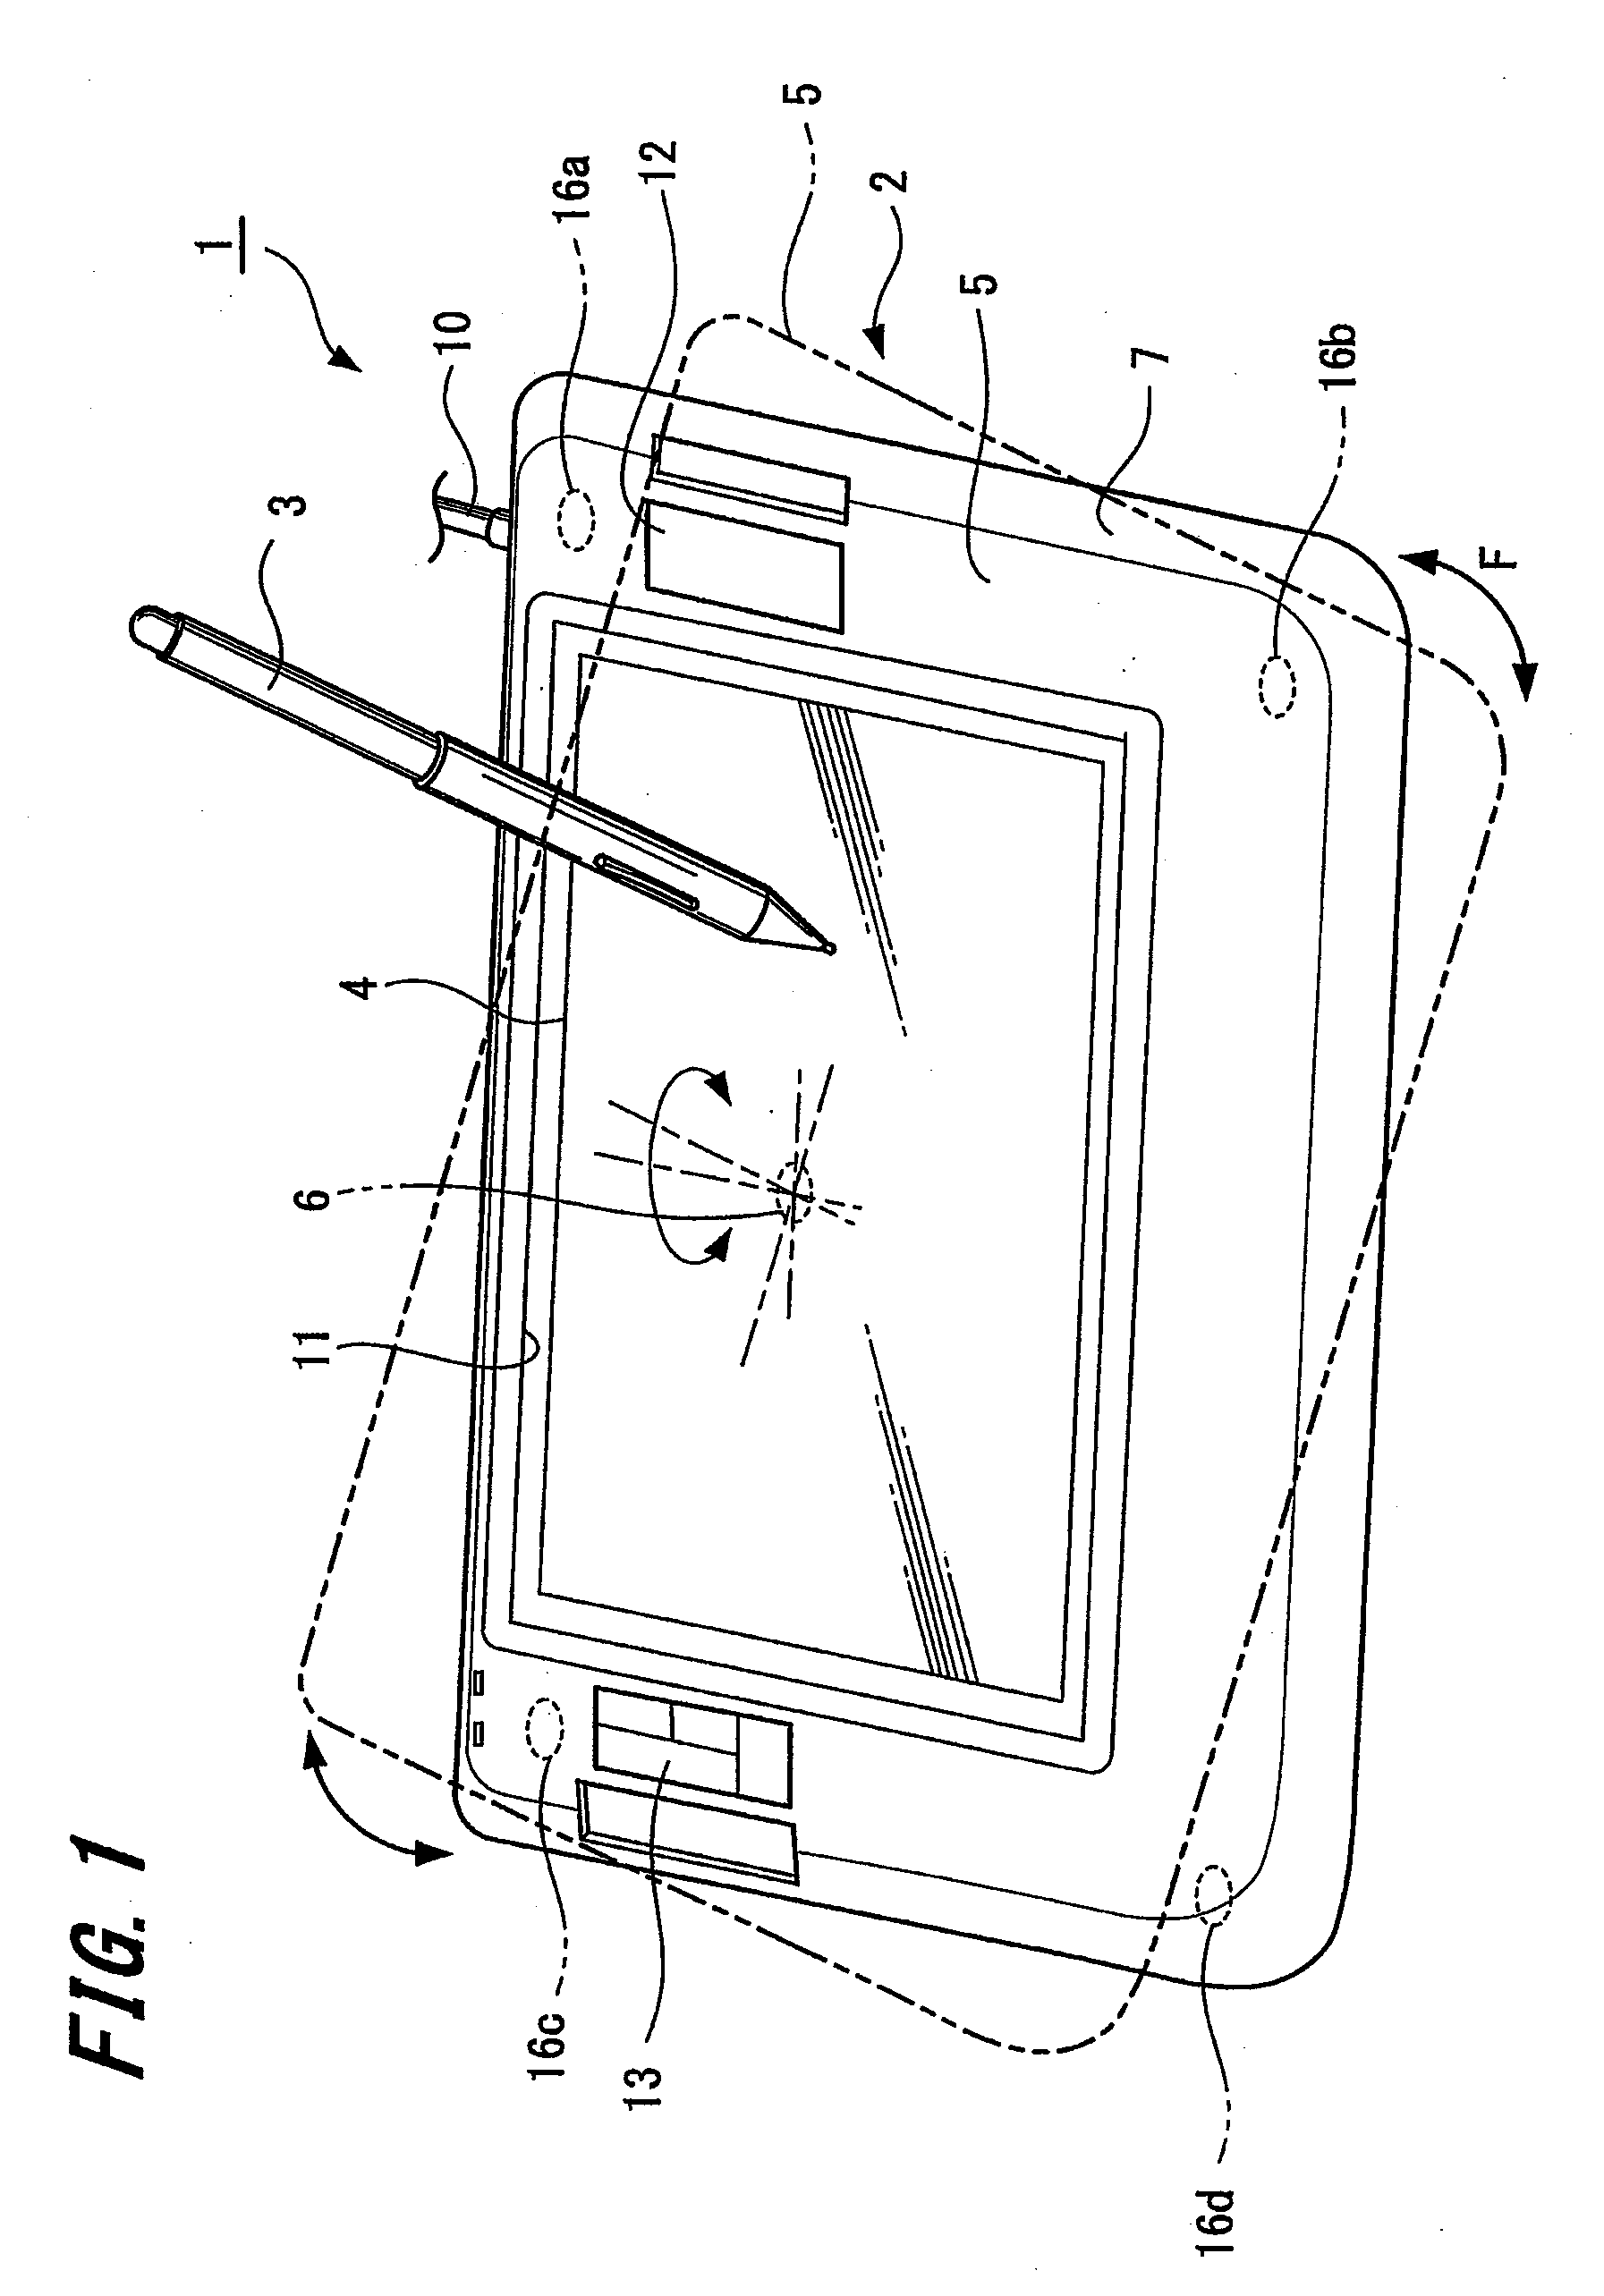 Digitizer and input device